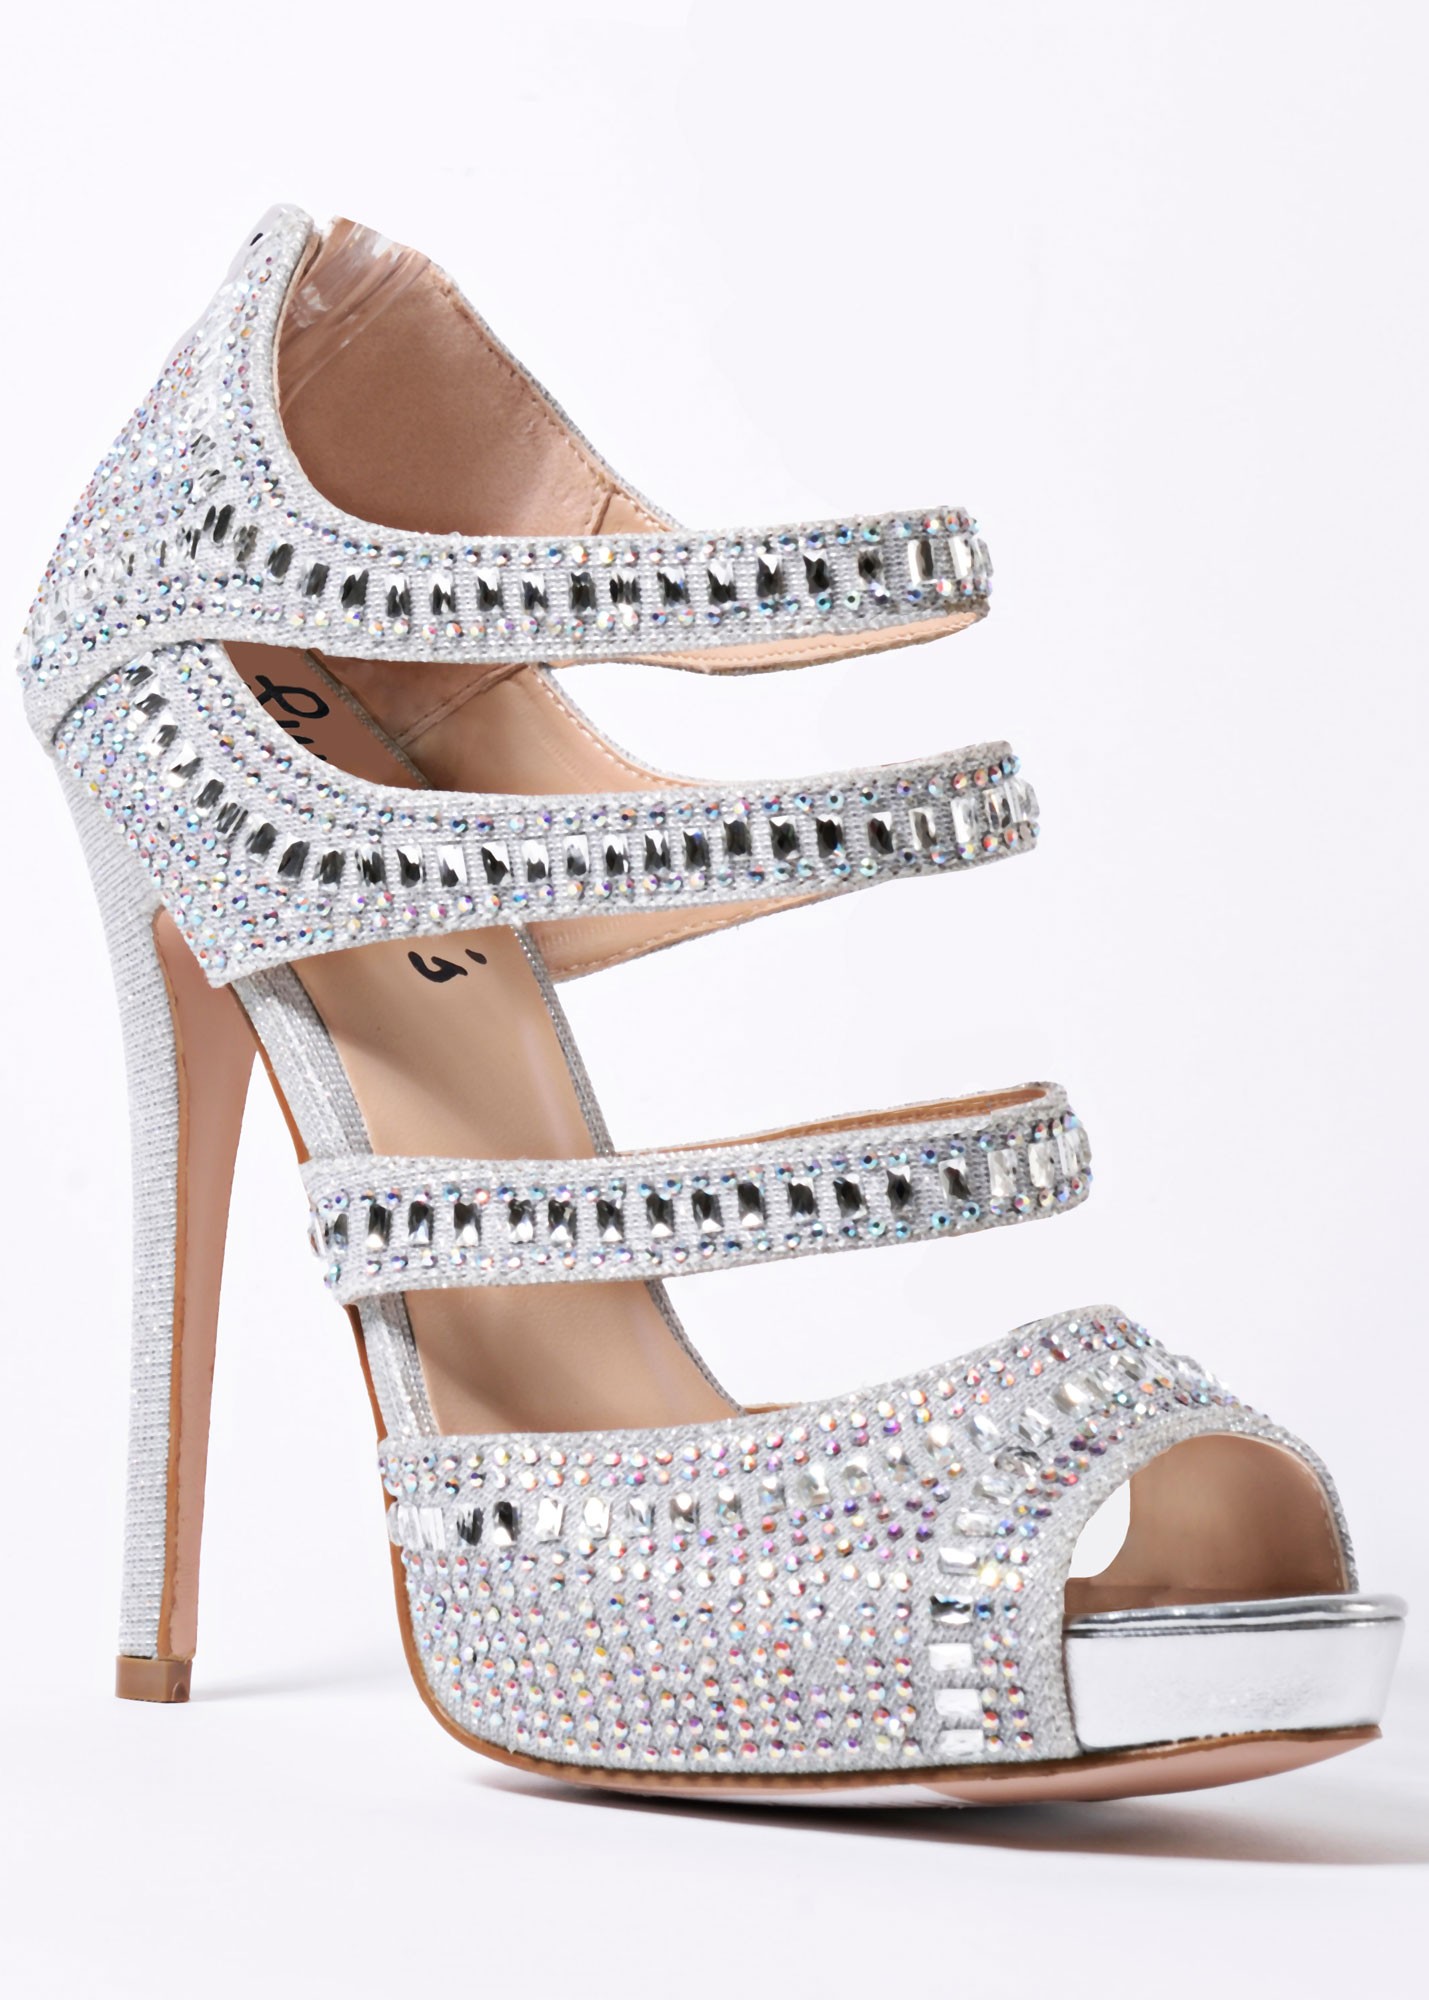 Sweetie's Jewel Silver Crystal Jeweled Strappy Pump